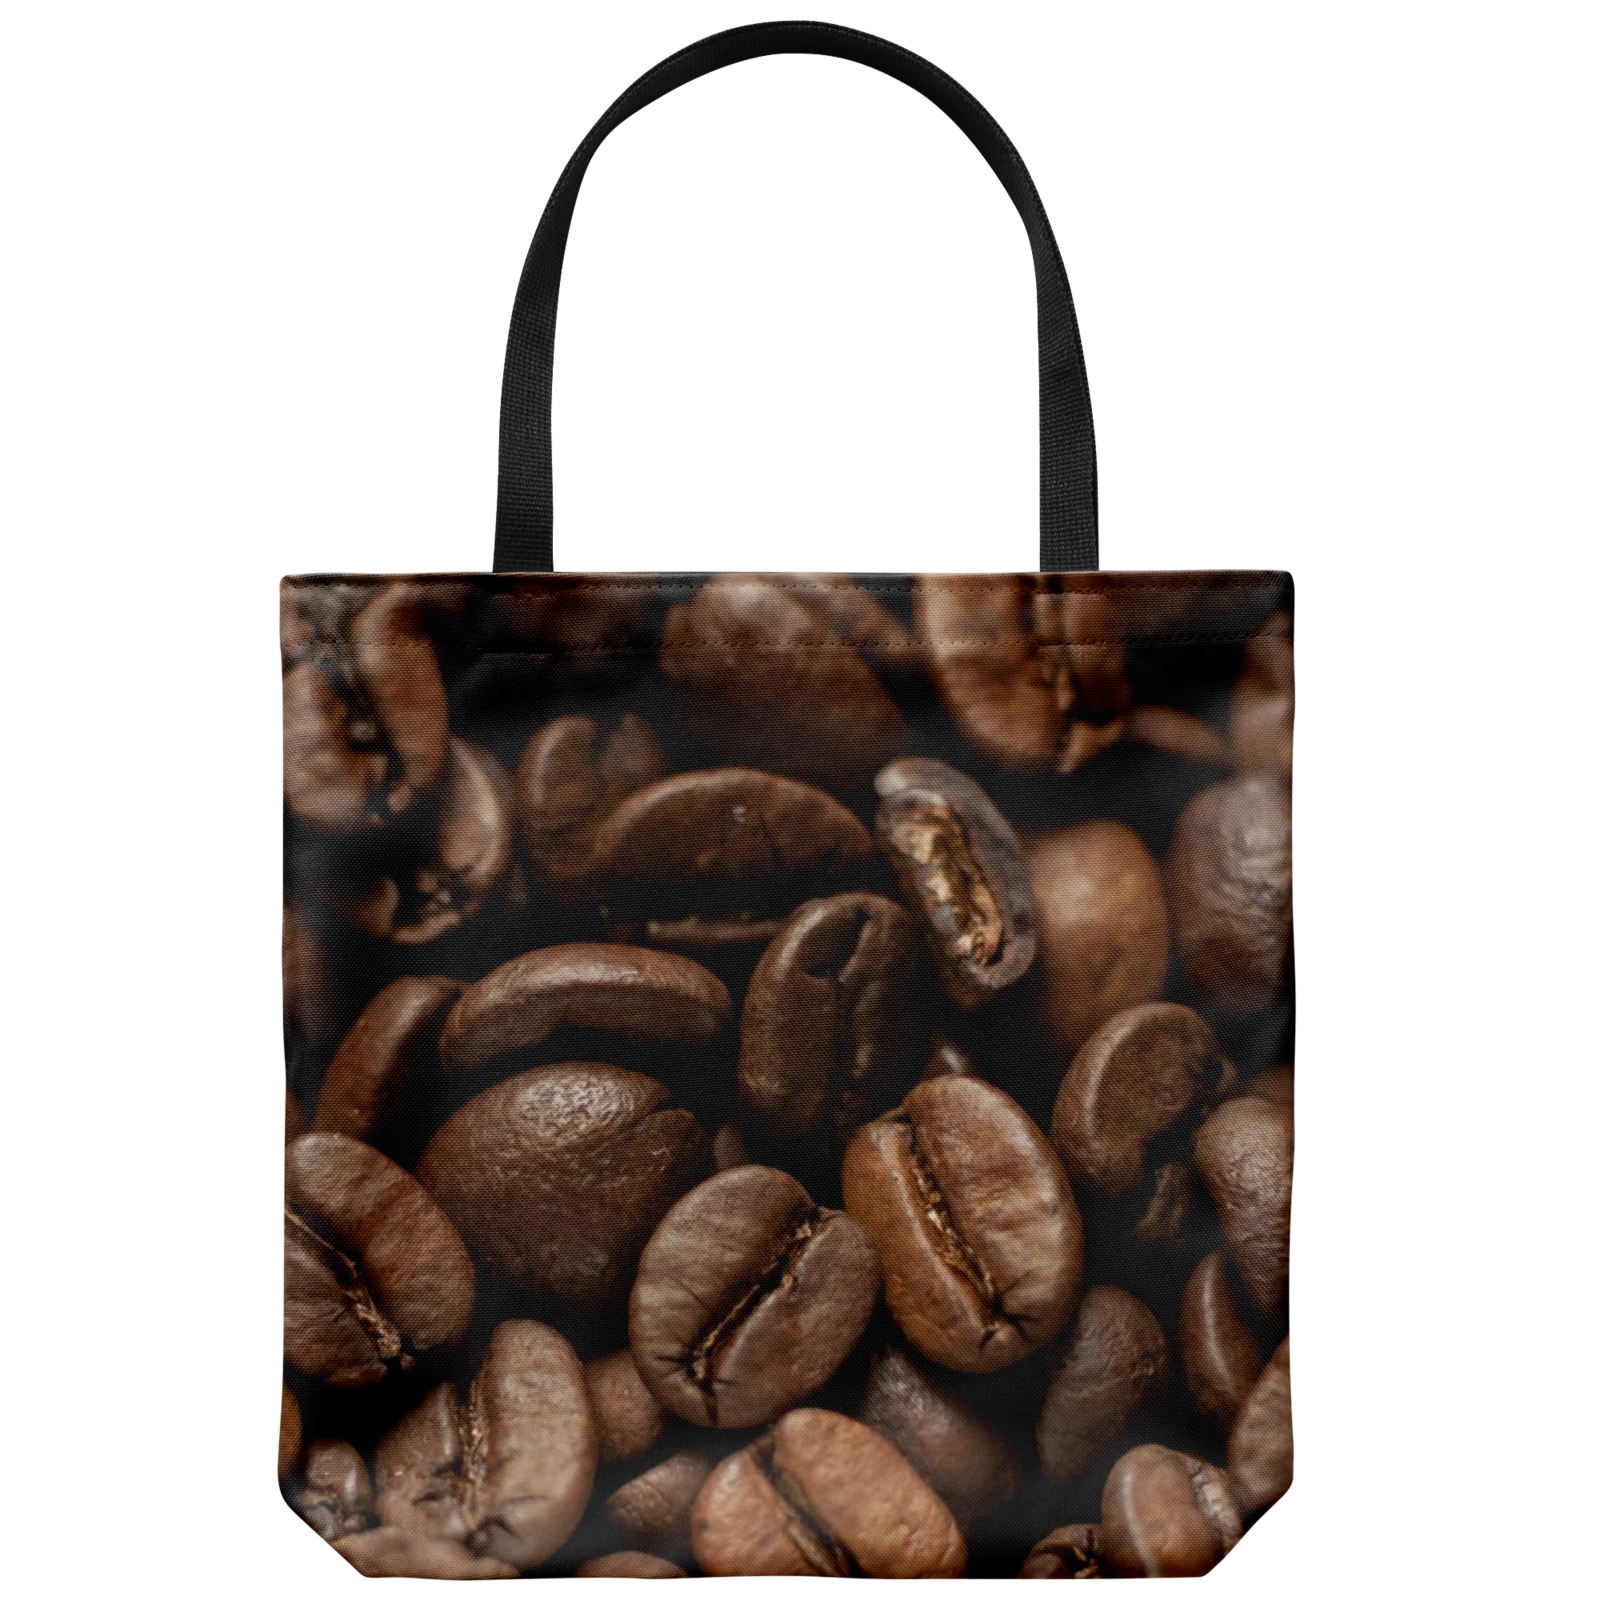 Coffee Beans Print Tote Bag Shoulder or Carry Printed On Both Sides ...